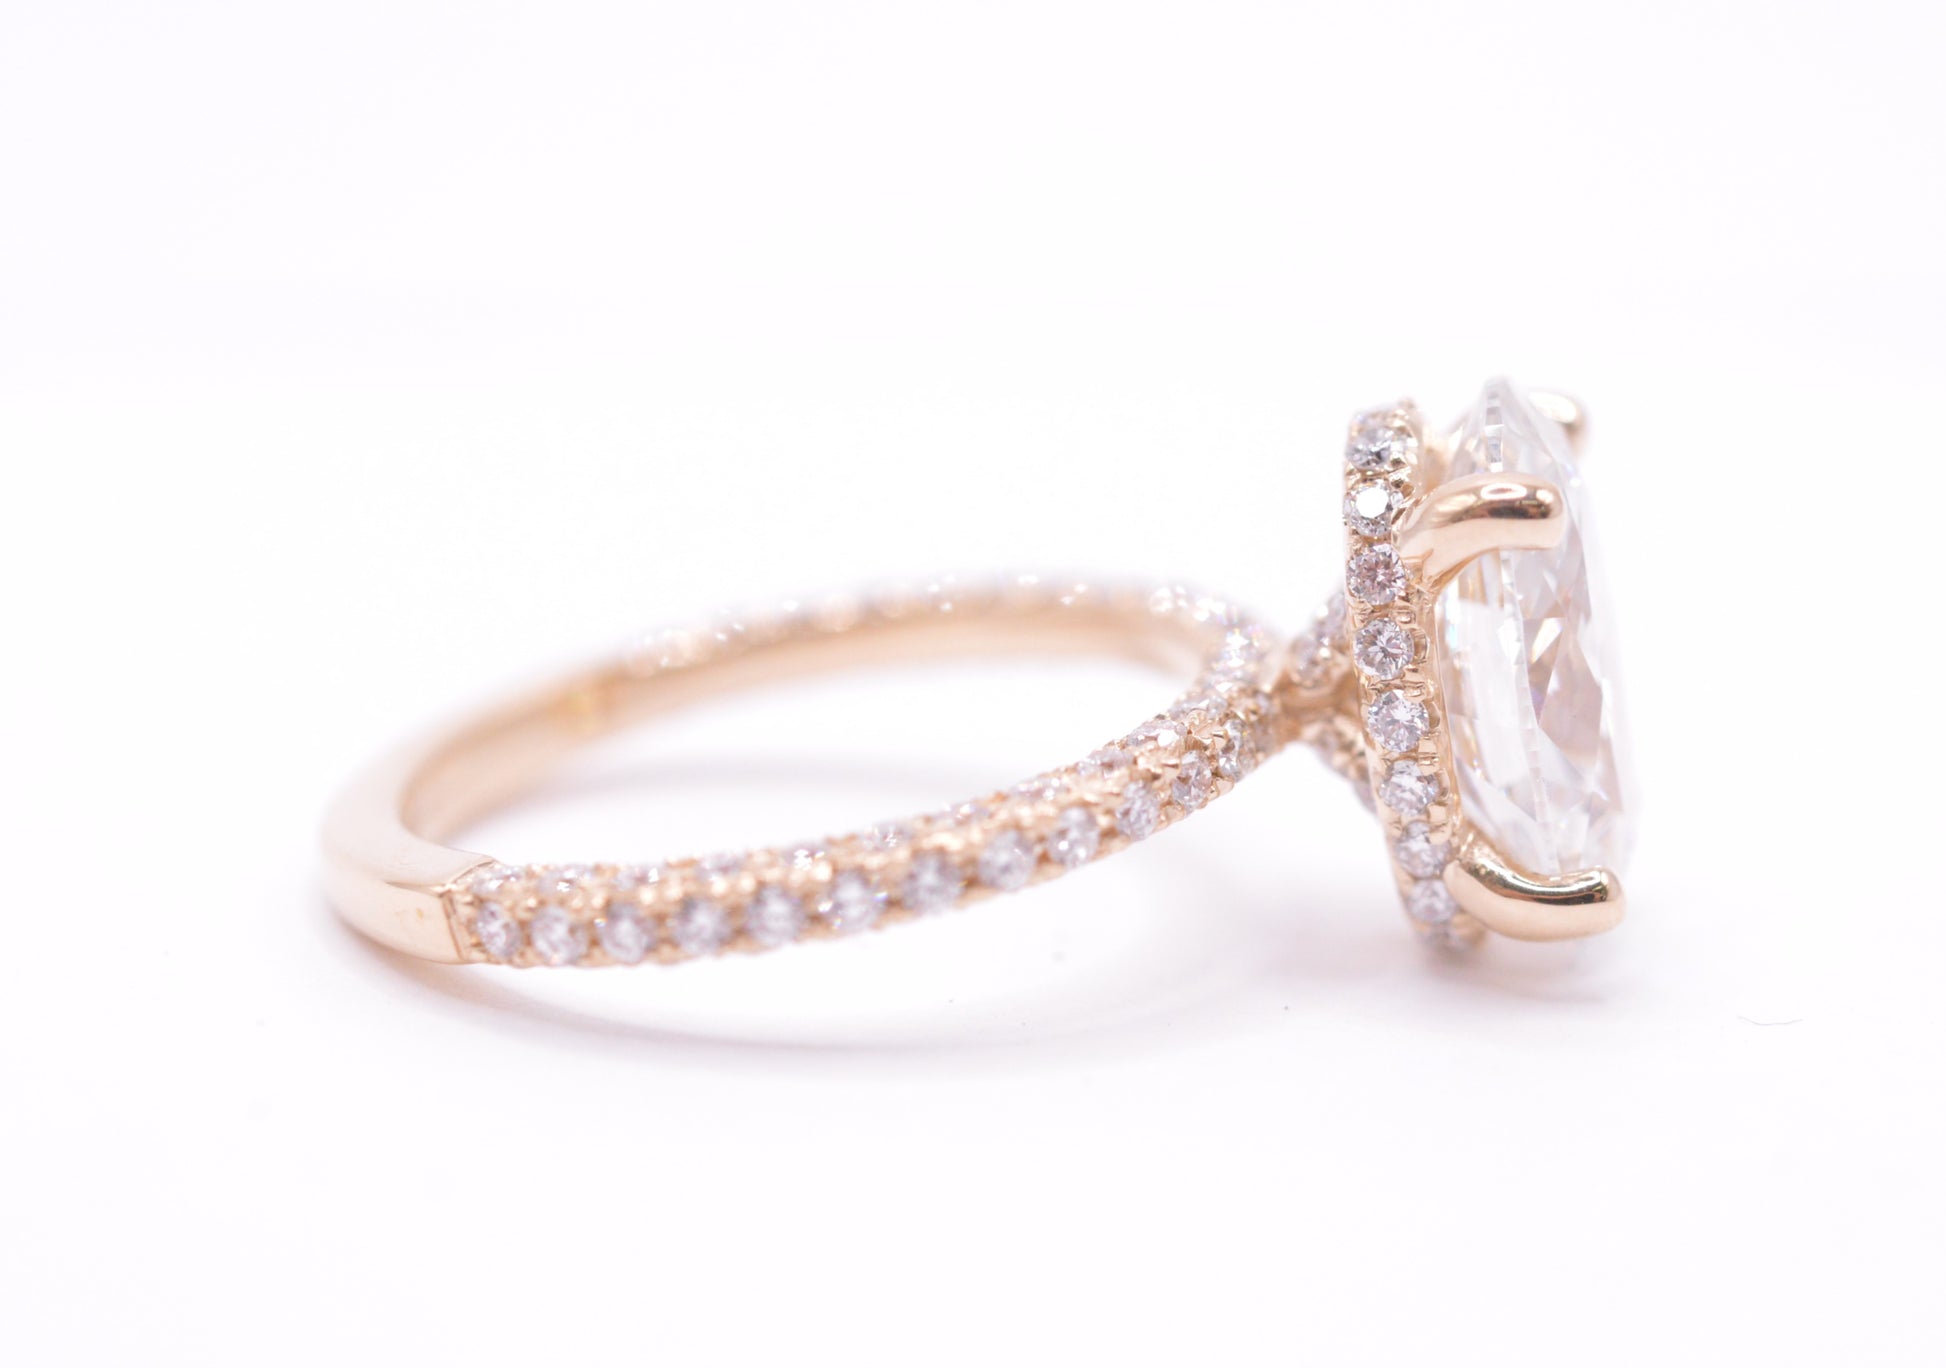 Made to Order-3ct Oval Lab Diamond Engagement Ring 14K Yellow Gold Made to Order Rings